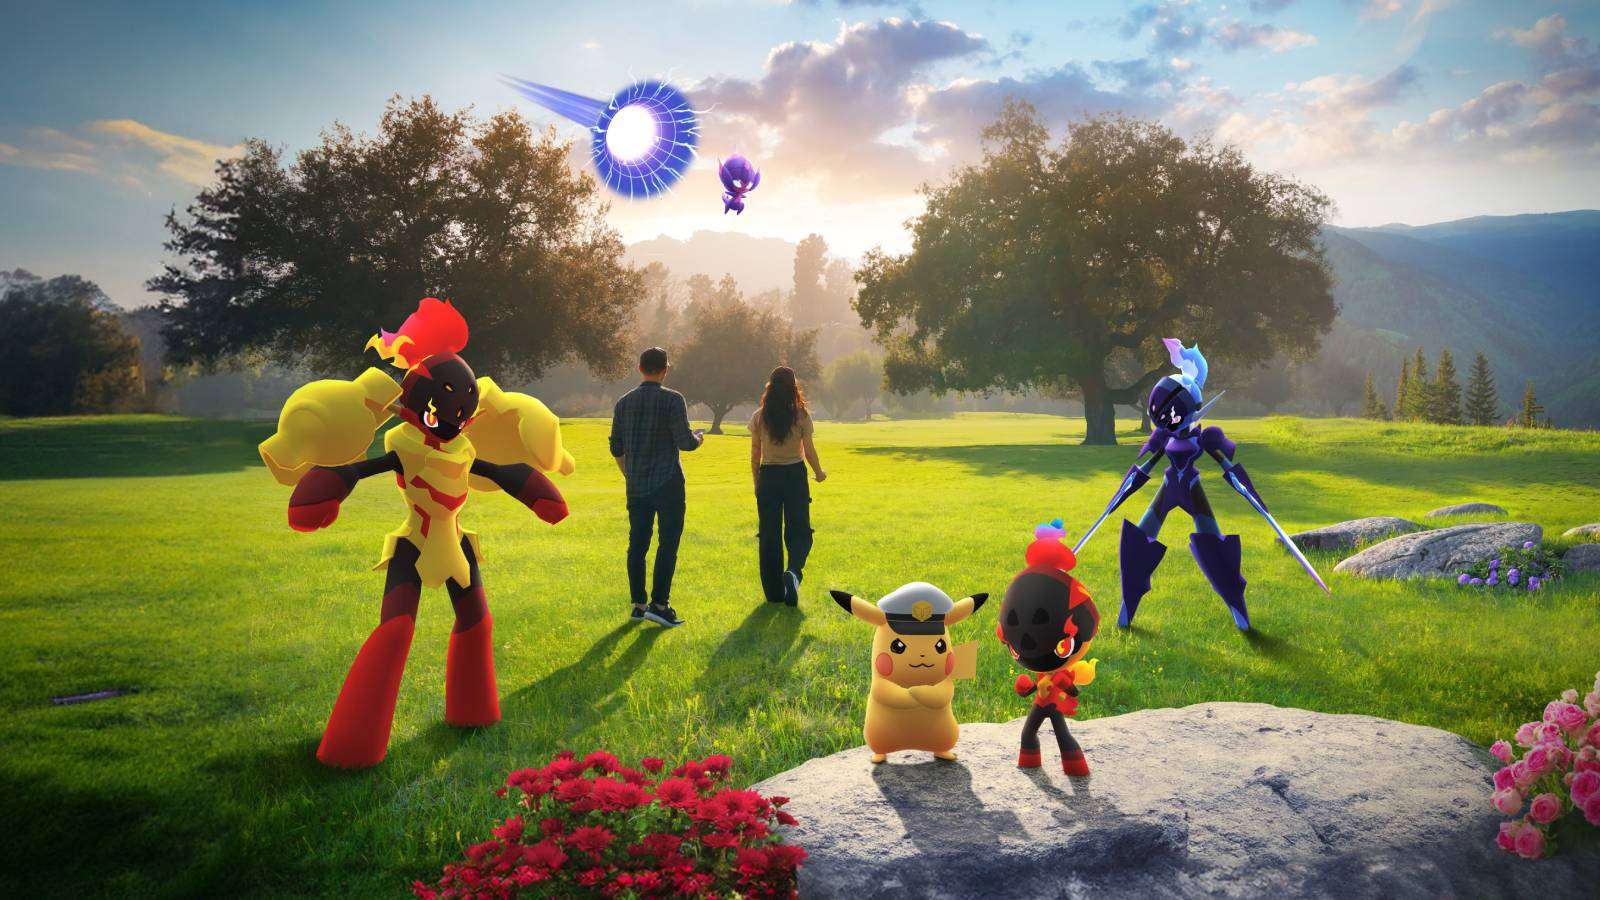 Pokemon Go key art shows Captain Pikachu, Charcadet, Poipole, and several other Pokemon standing in a green field